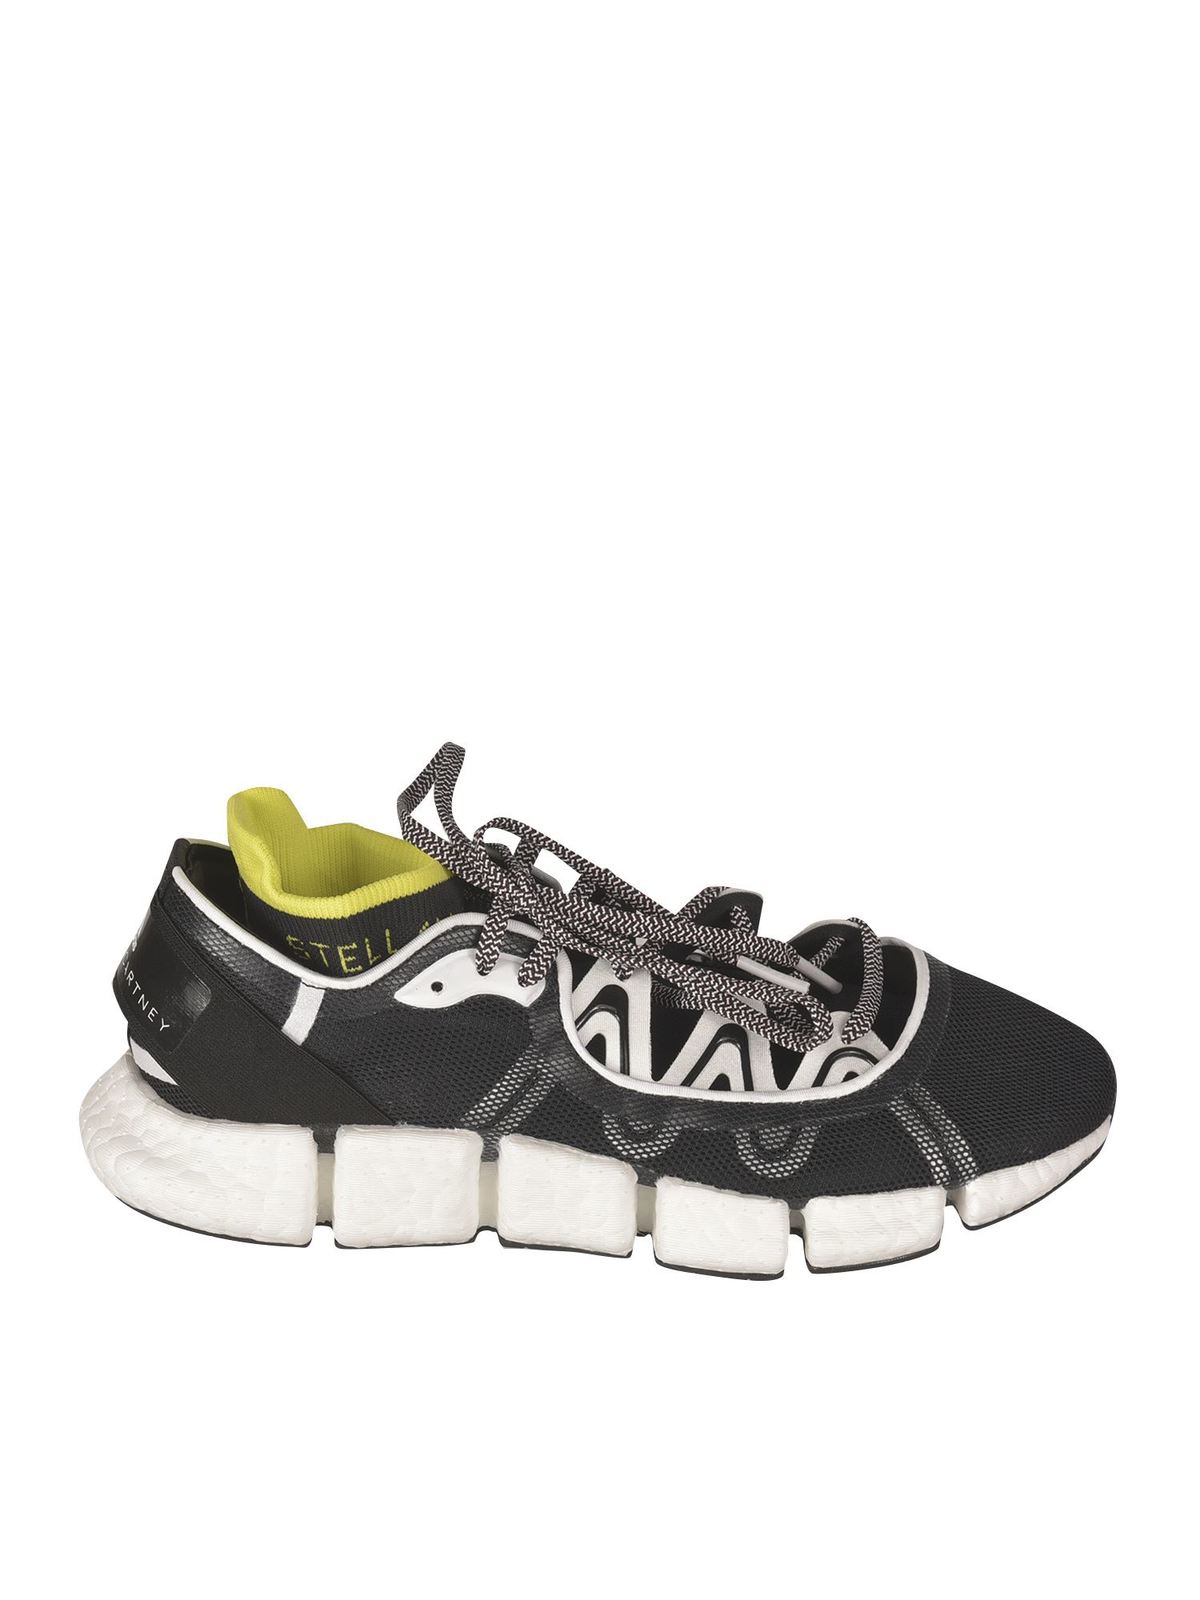 ADIDAS BY STELLA MCCARTNEY CLIMA COOL VENTO SNEAKERS IN BLACK